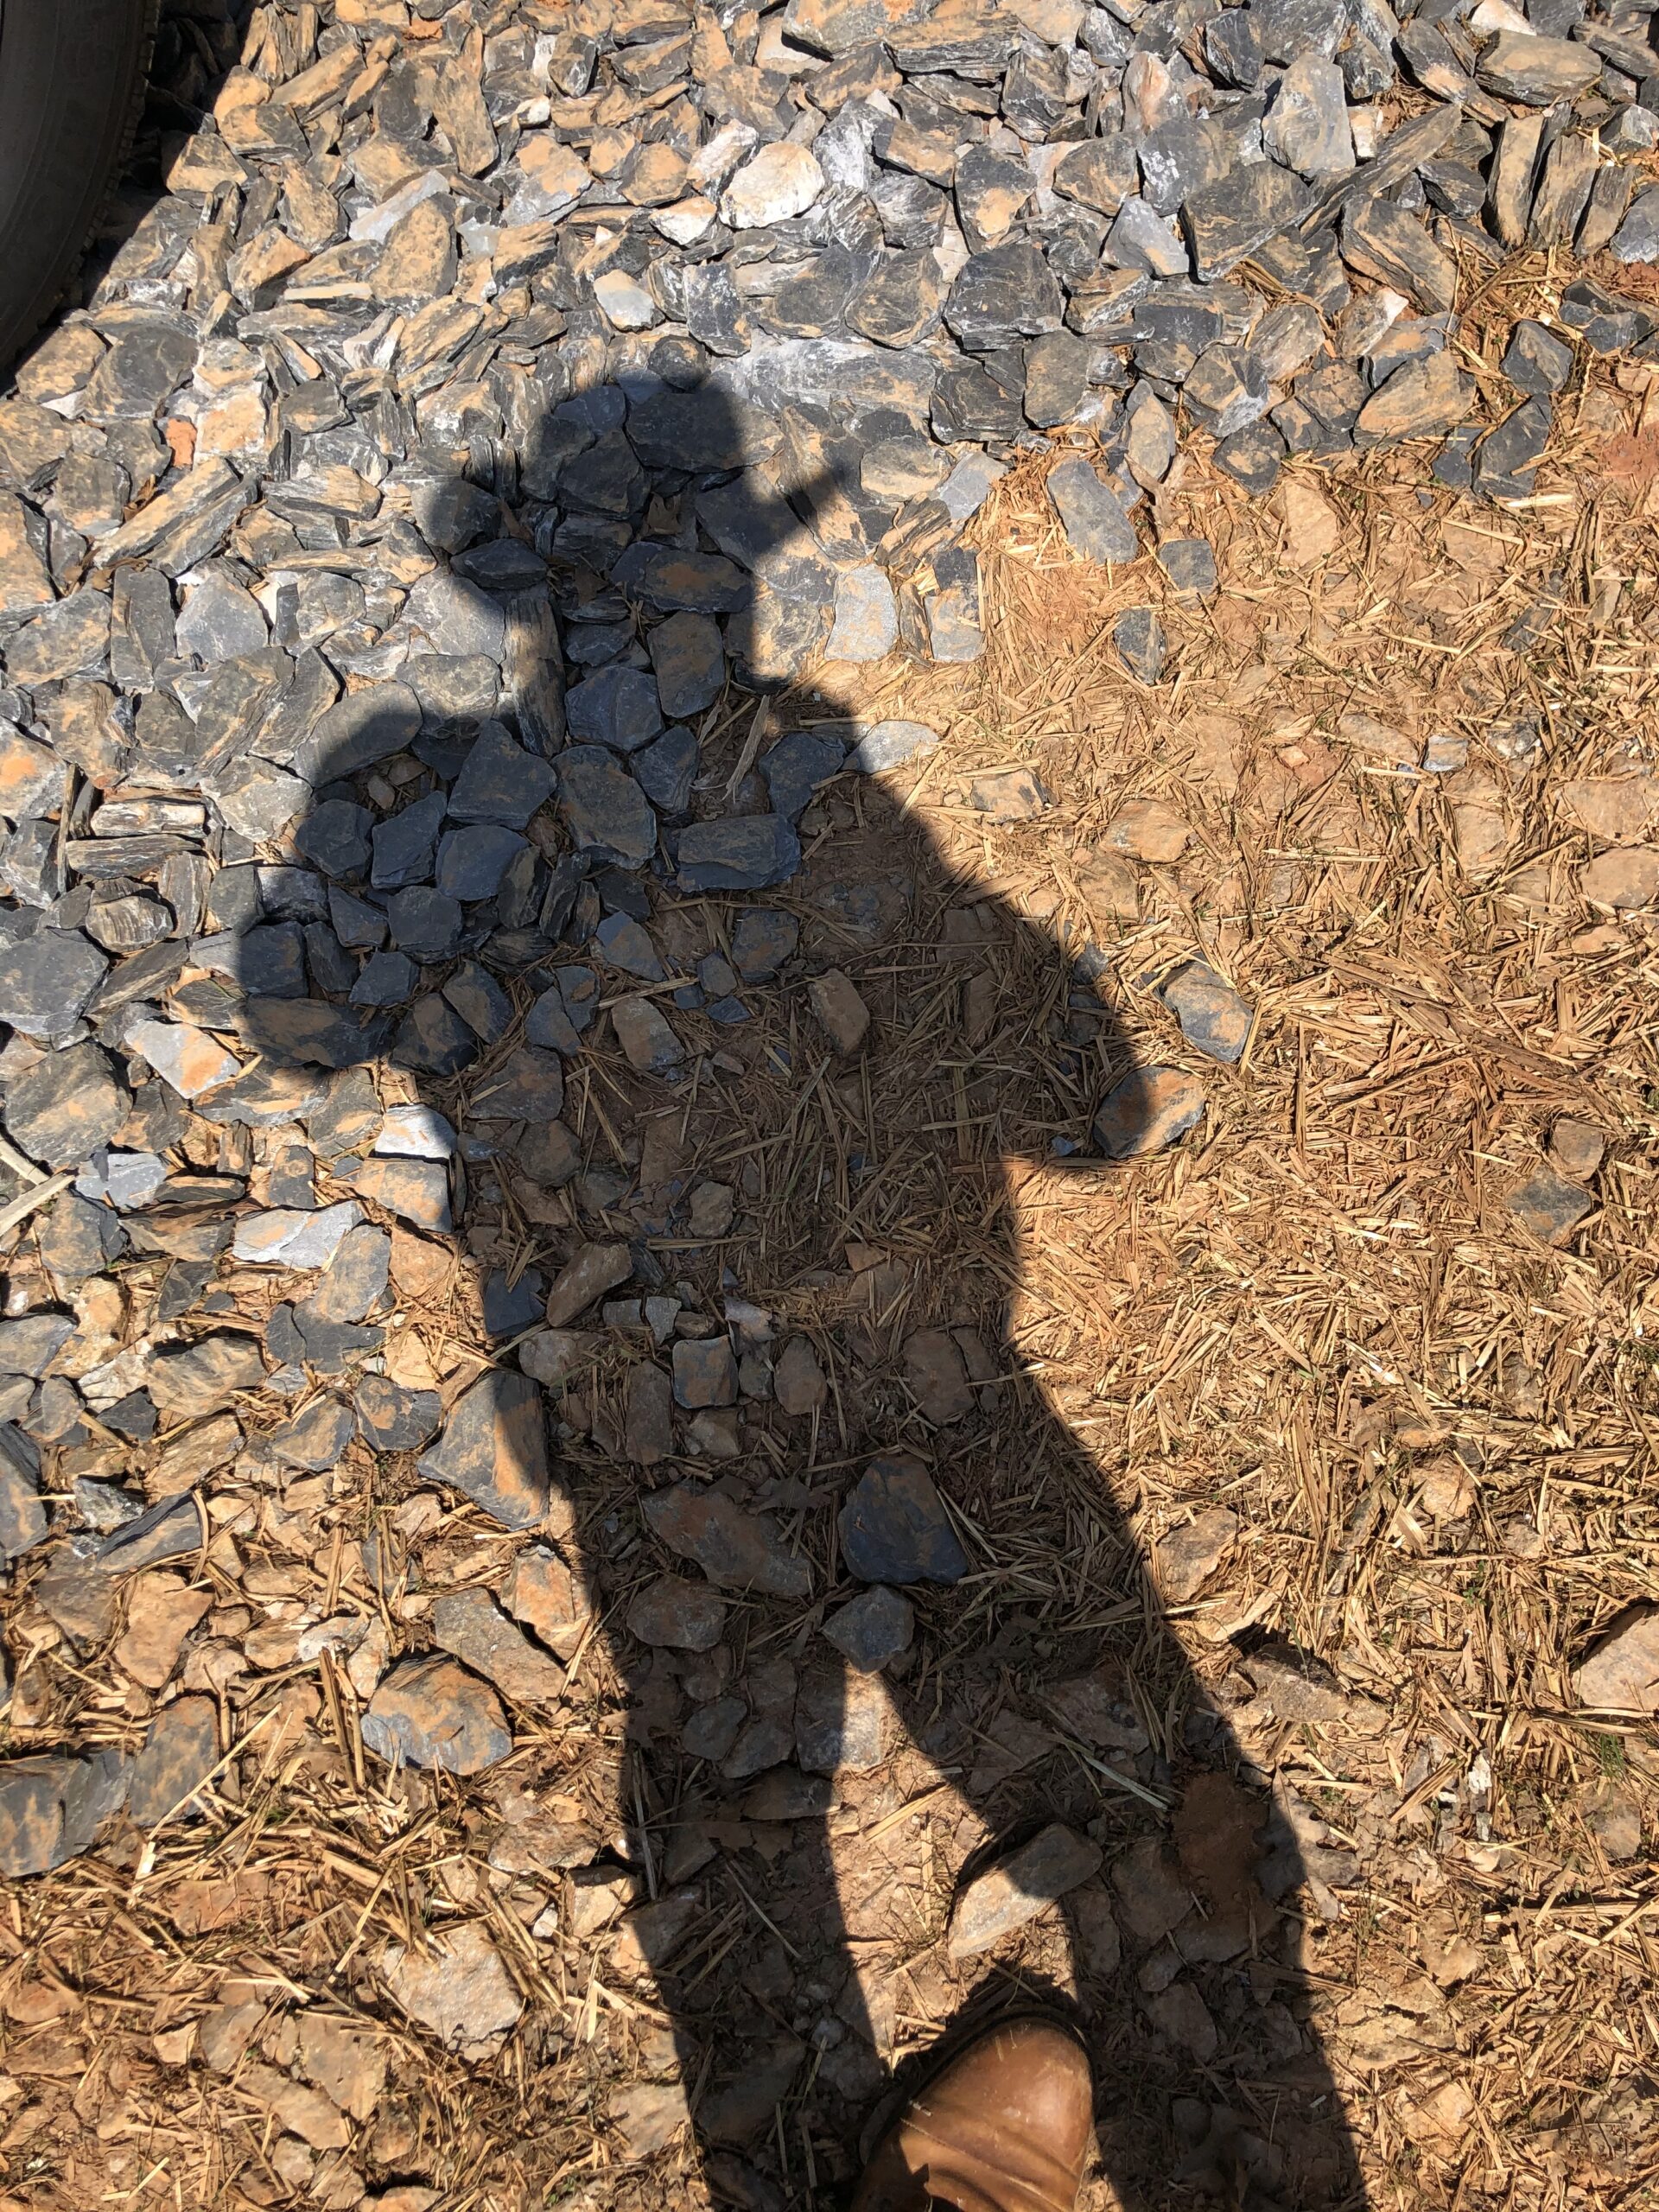 Shadow silhouette of Greg wearing a cowboy hat